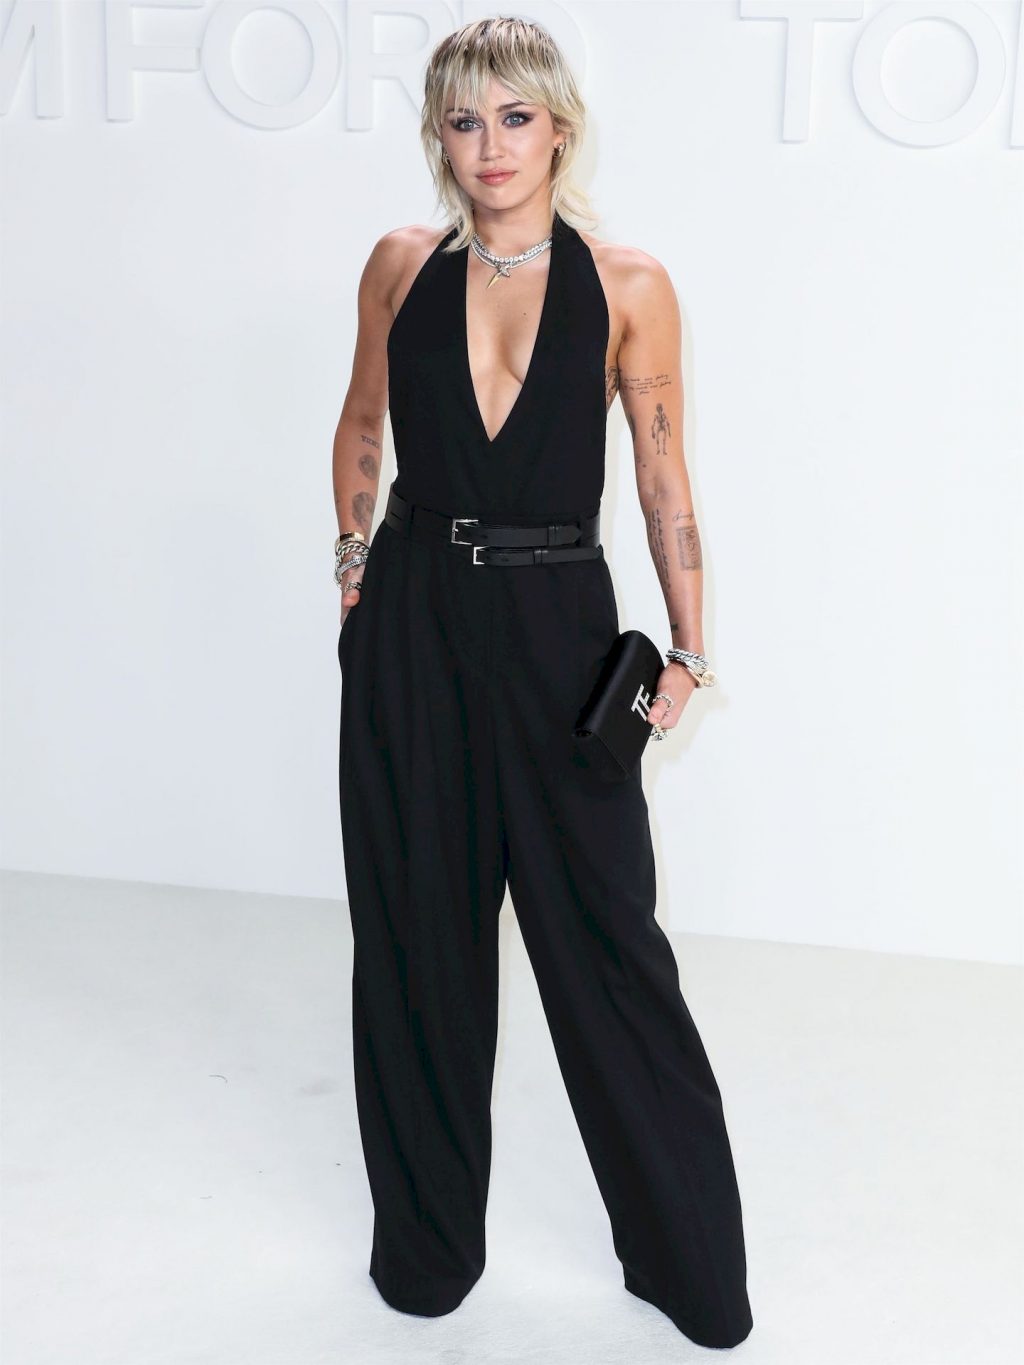 Miley Cyrus Looks Sexy at the Tom Ford Autumn/Winter 2020 Fashion Show (93 Photos)